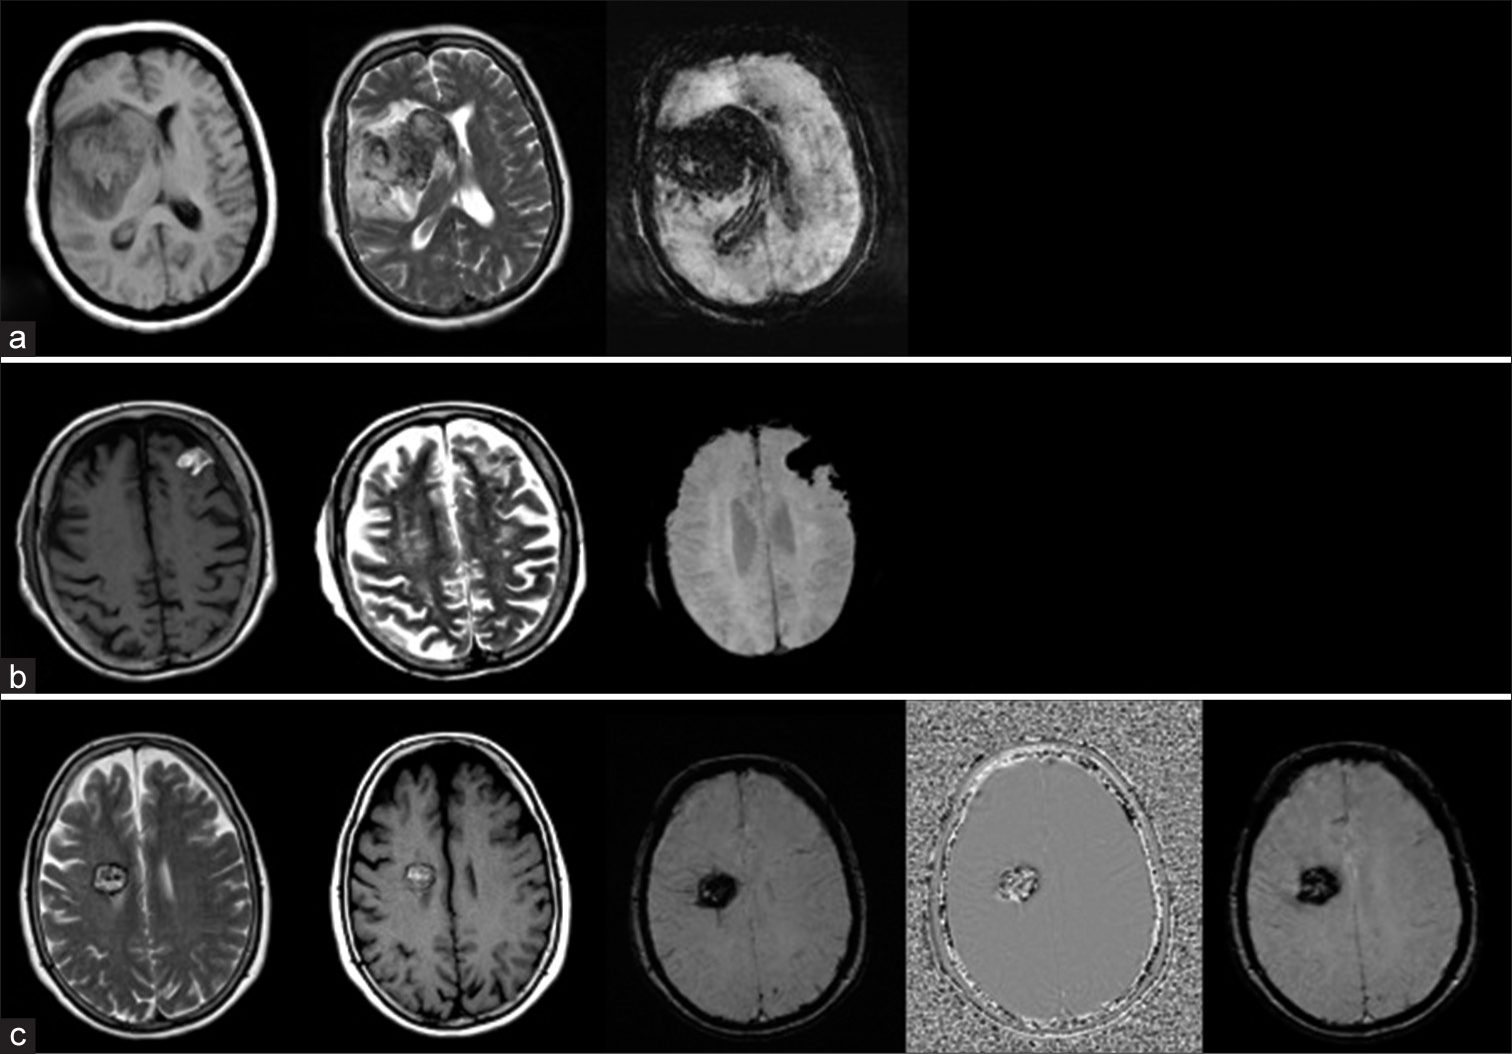 Cerebral microbleeds: Causes, clinical relevance, and imaging approach – A narrative review